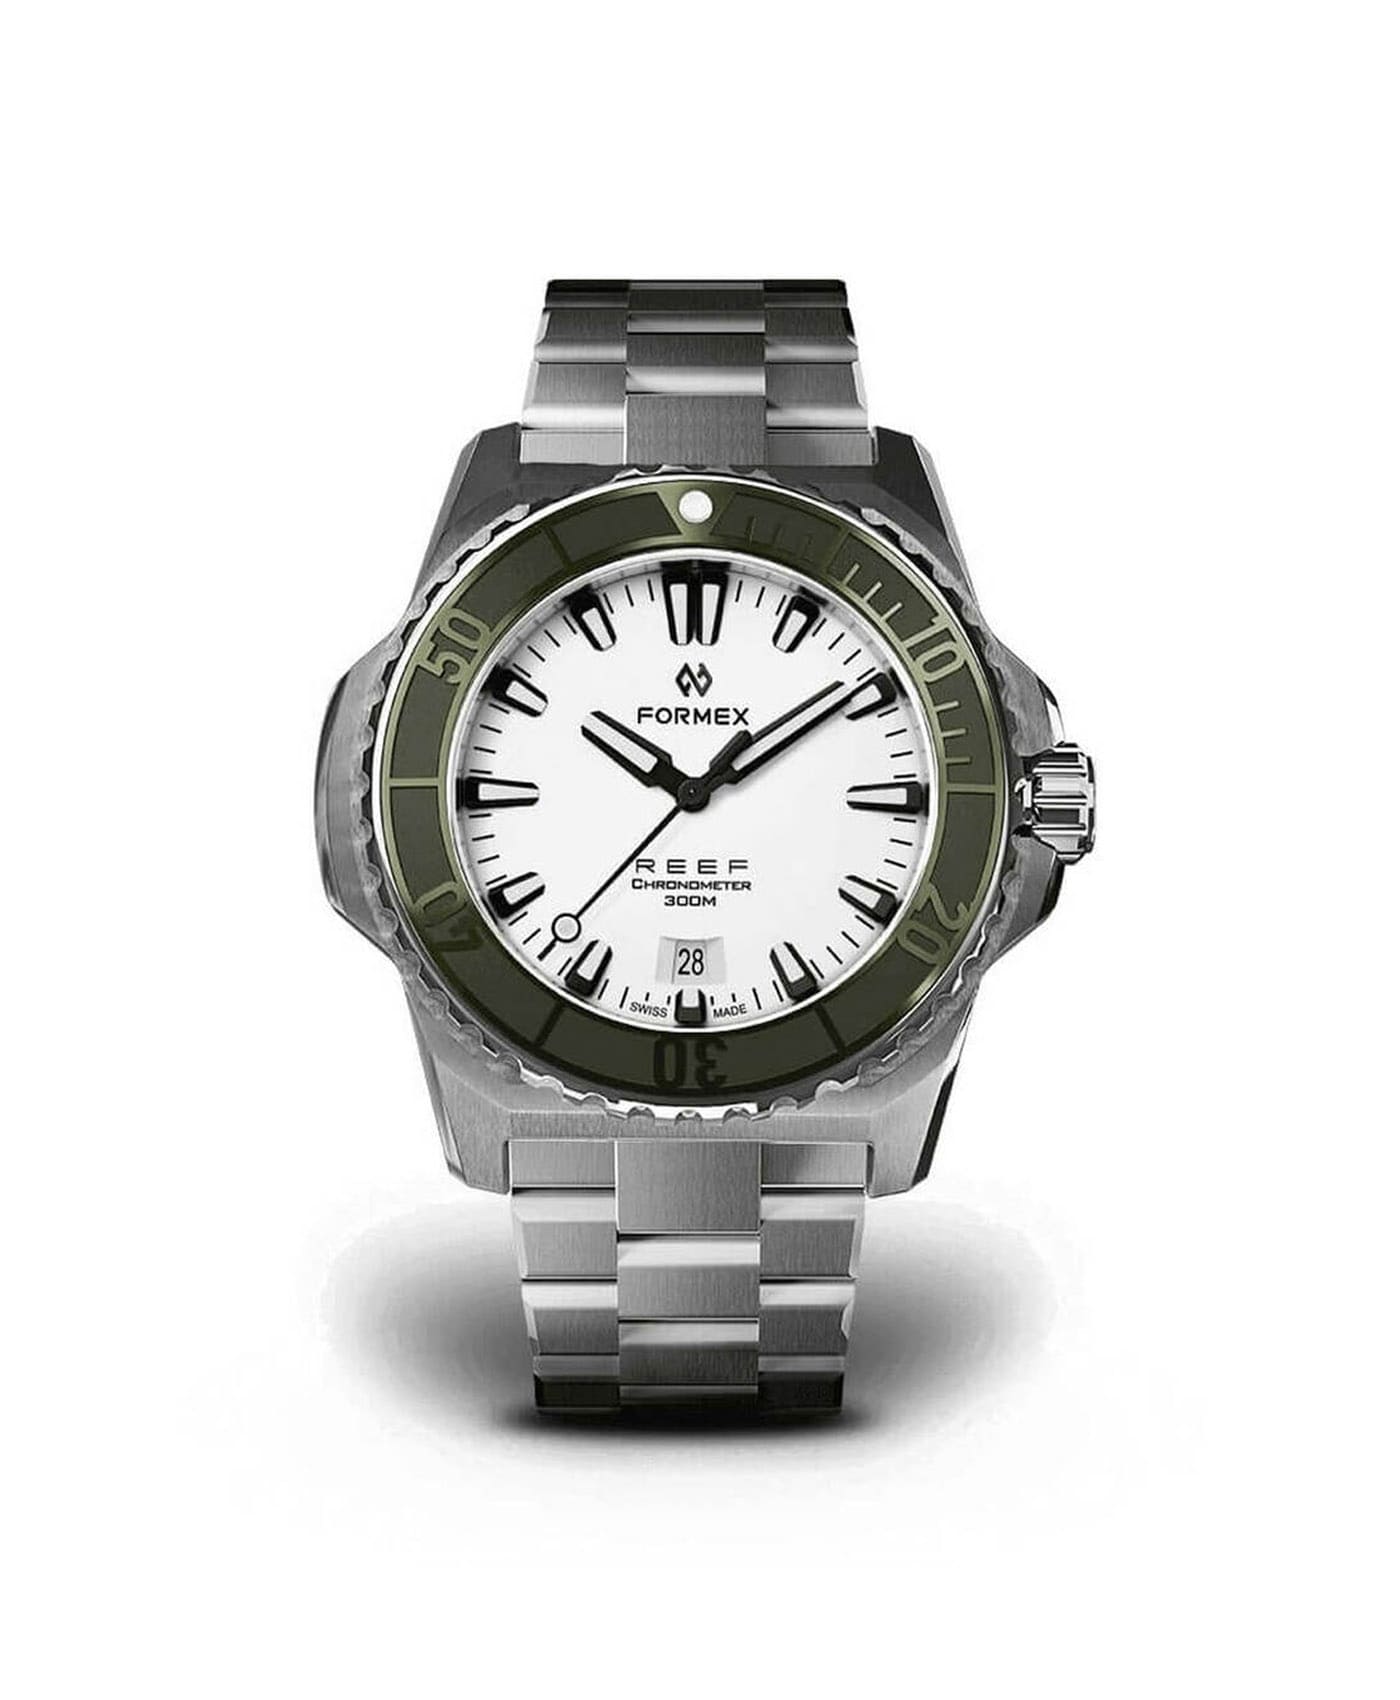 Formex - Reef - Automatic Chronometer COSC 300m_White Dial Green Bezel